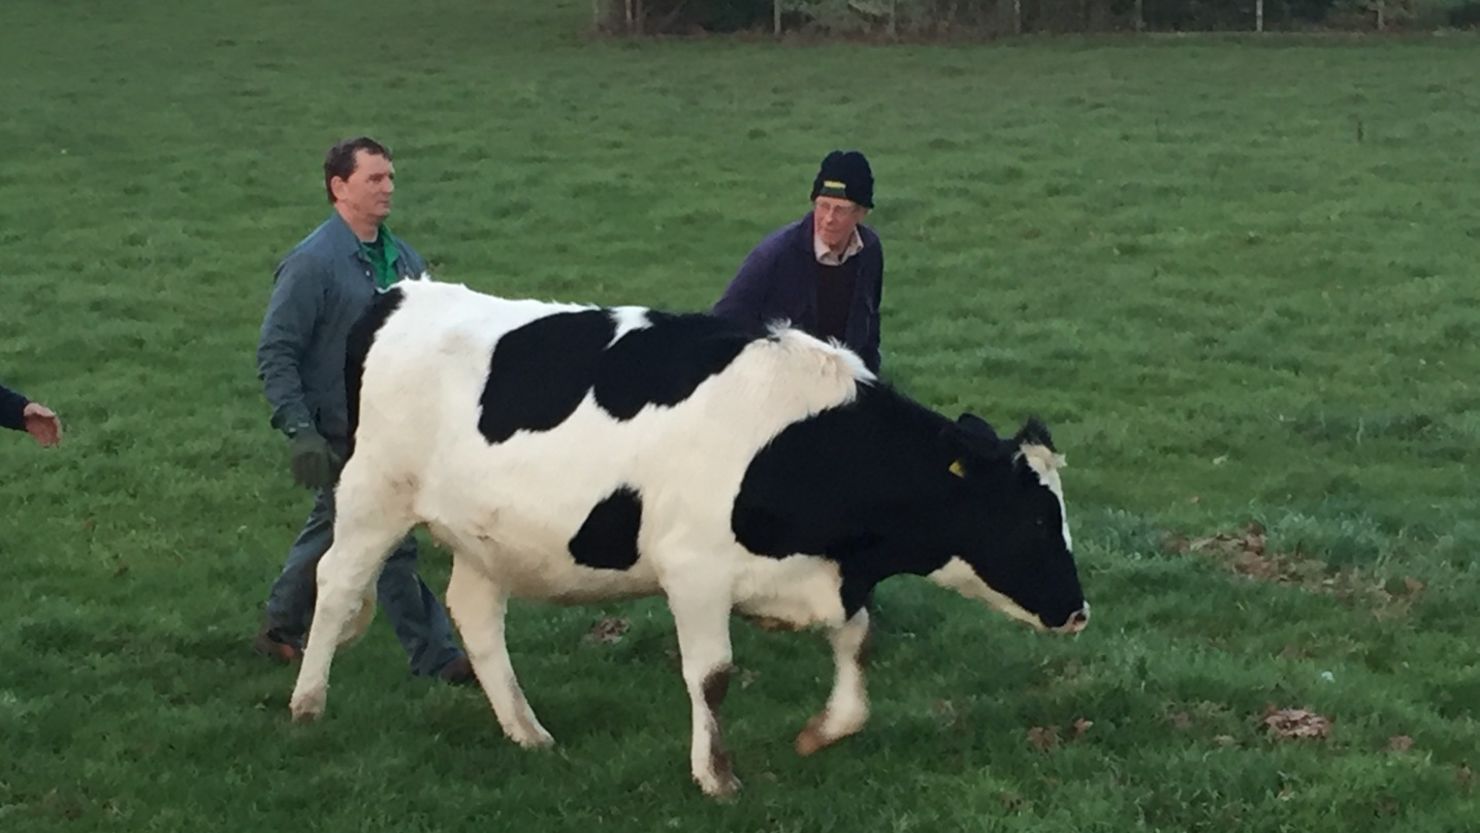 The miracle cow who was carried 15 miles away from its farm by floodwaters in Cumbria, England, is herded home.